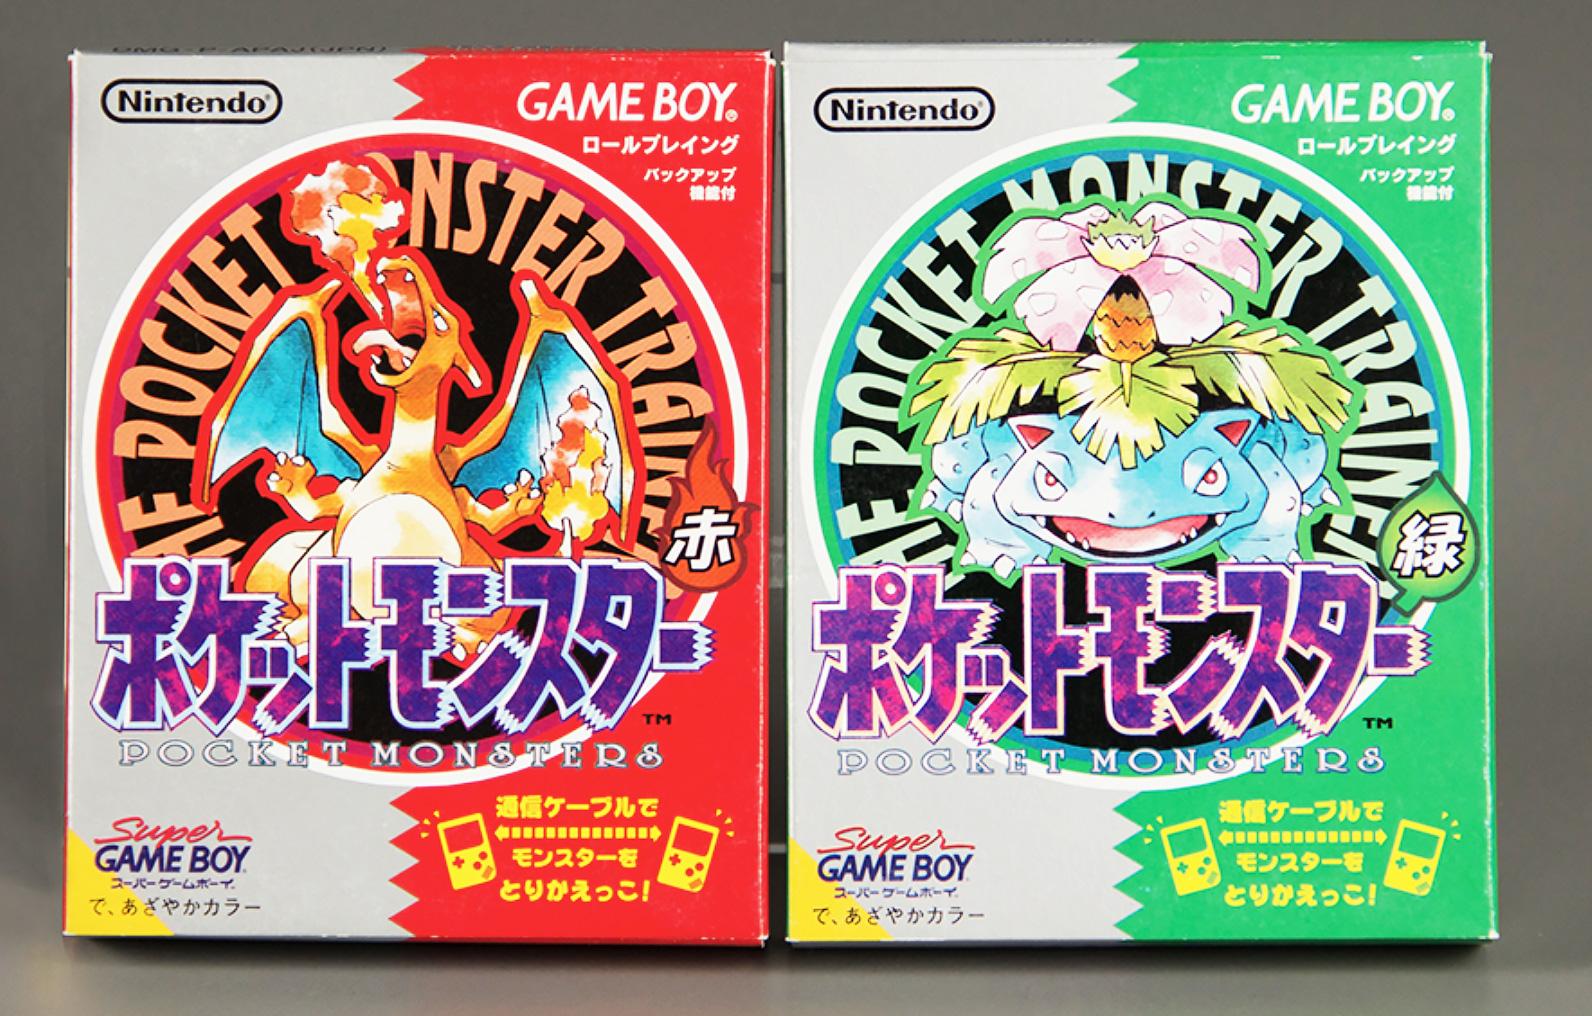 Photograph of Pokemon Red & Green's Game Boy box art from 1996.